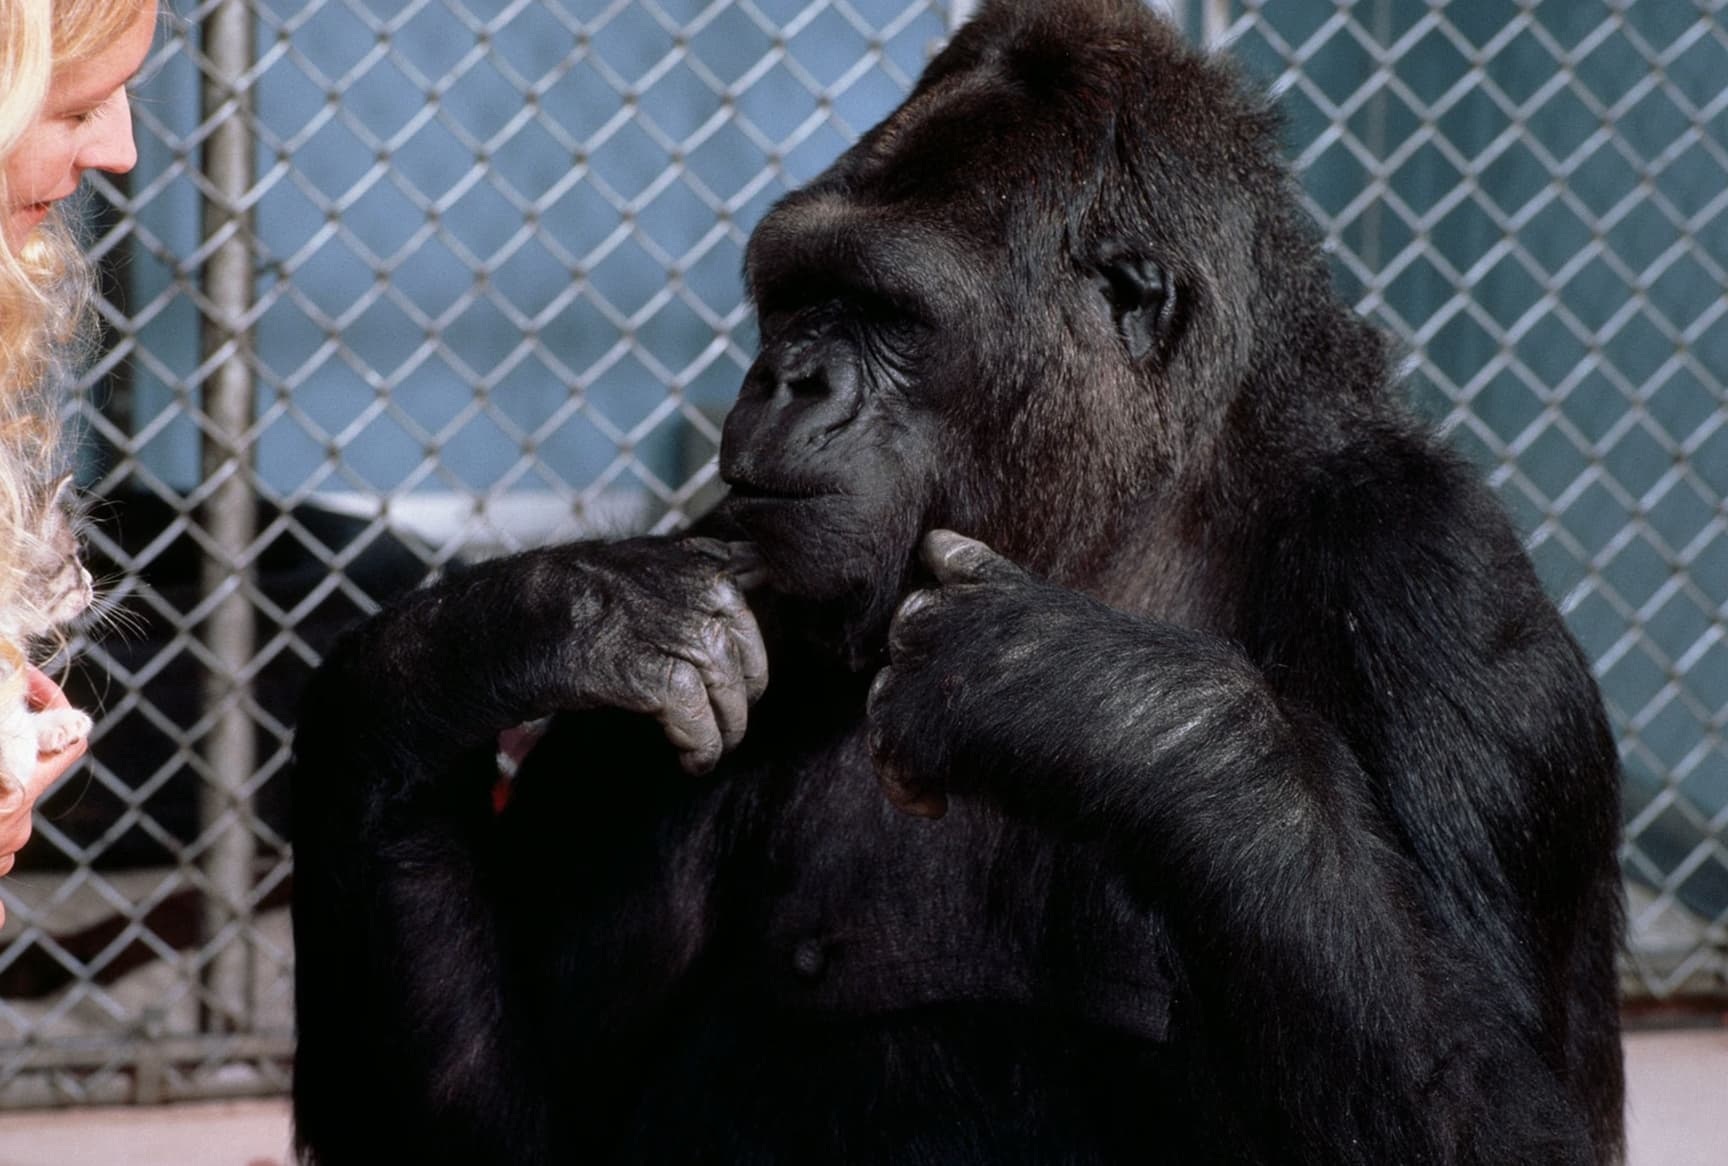 “TIL Scientists have been communicating with apes via sign language since the 1960s; apes have never asked one question.”